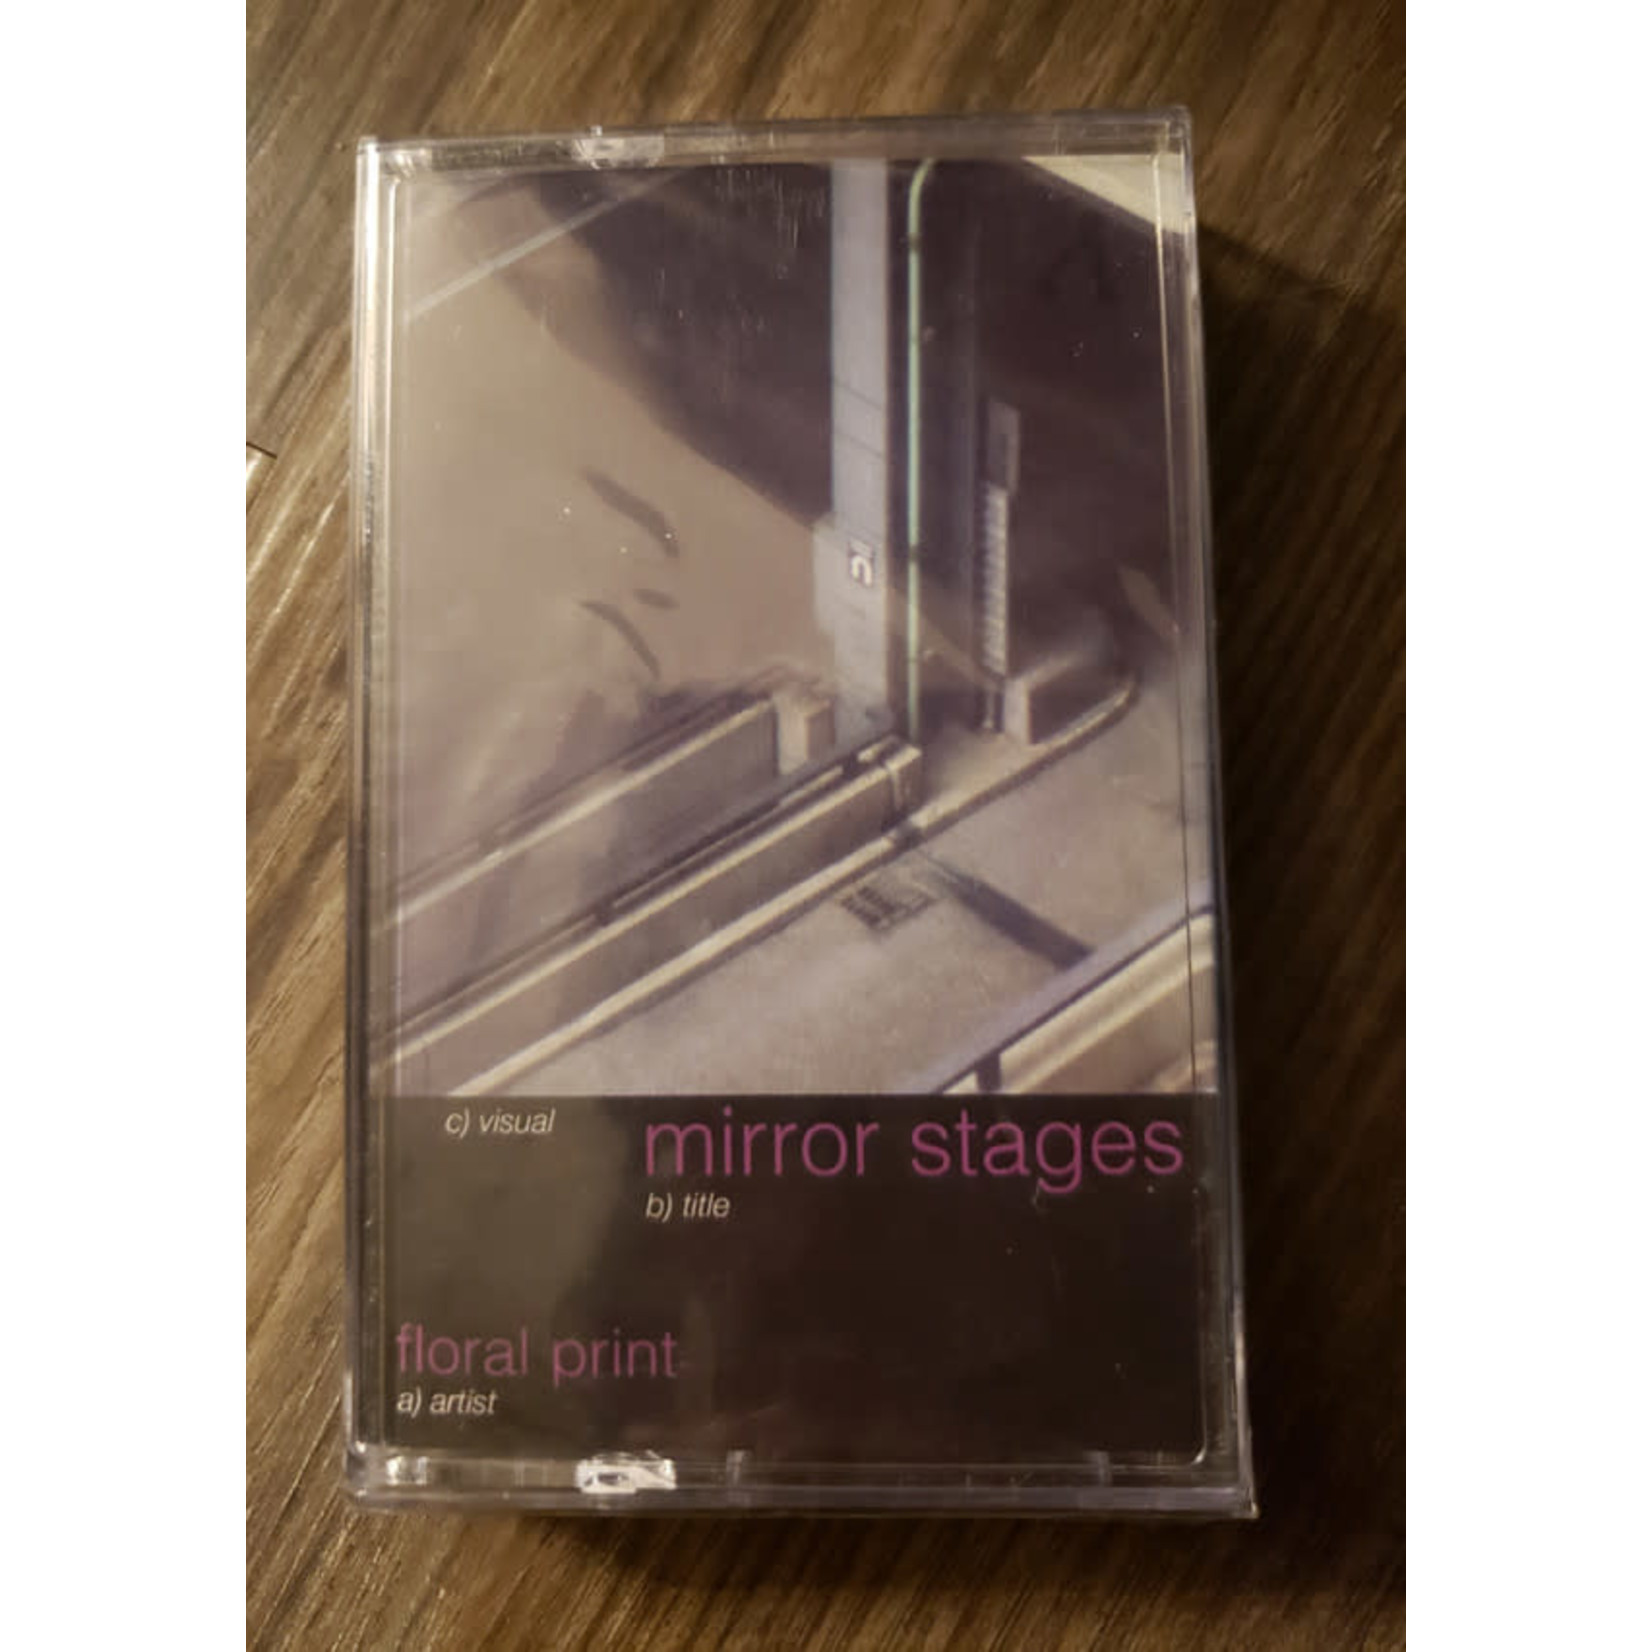 Tiny Engines Floral Print - Mirror Stages (Tape) [Pink]